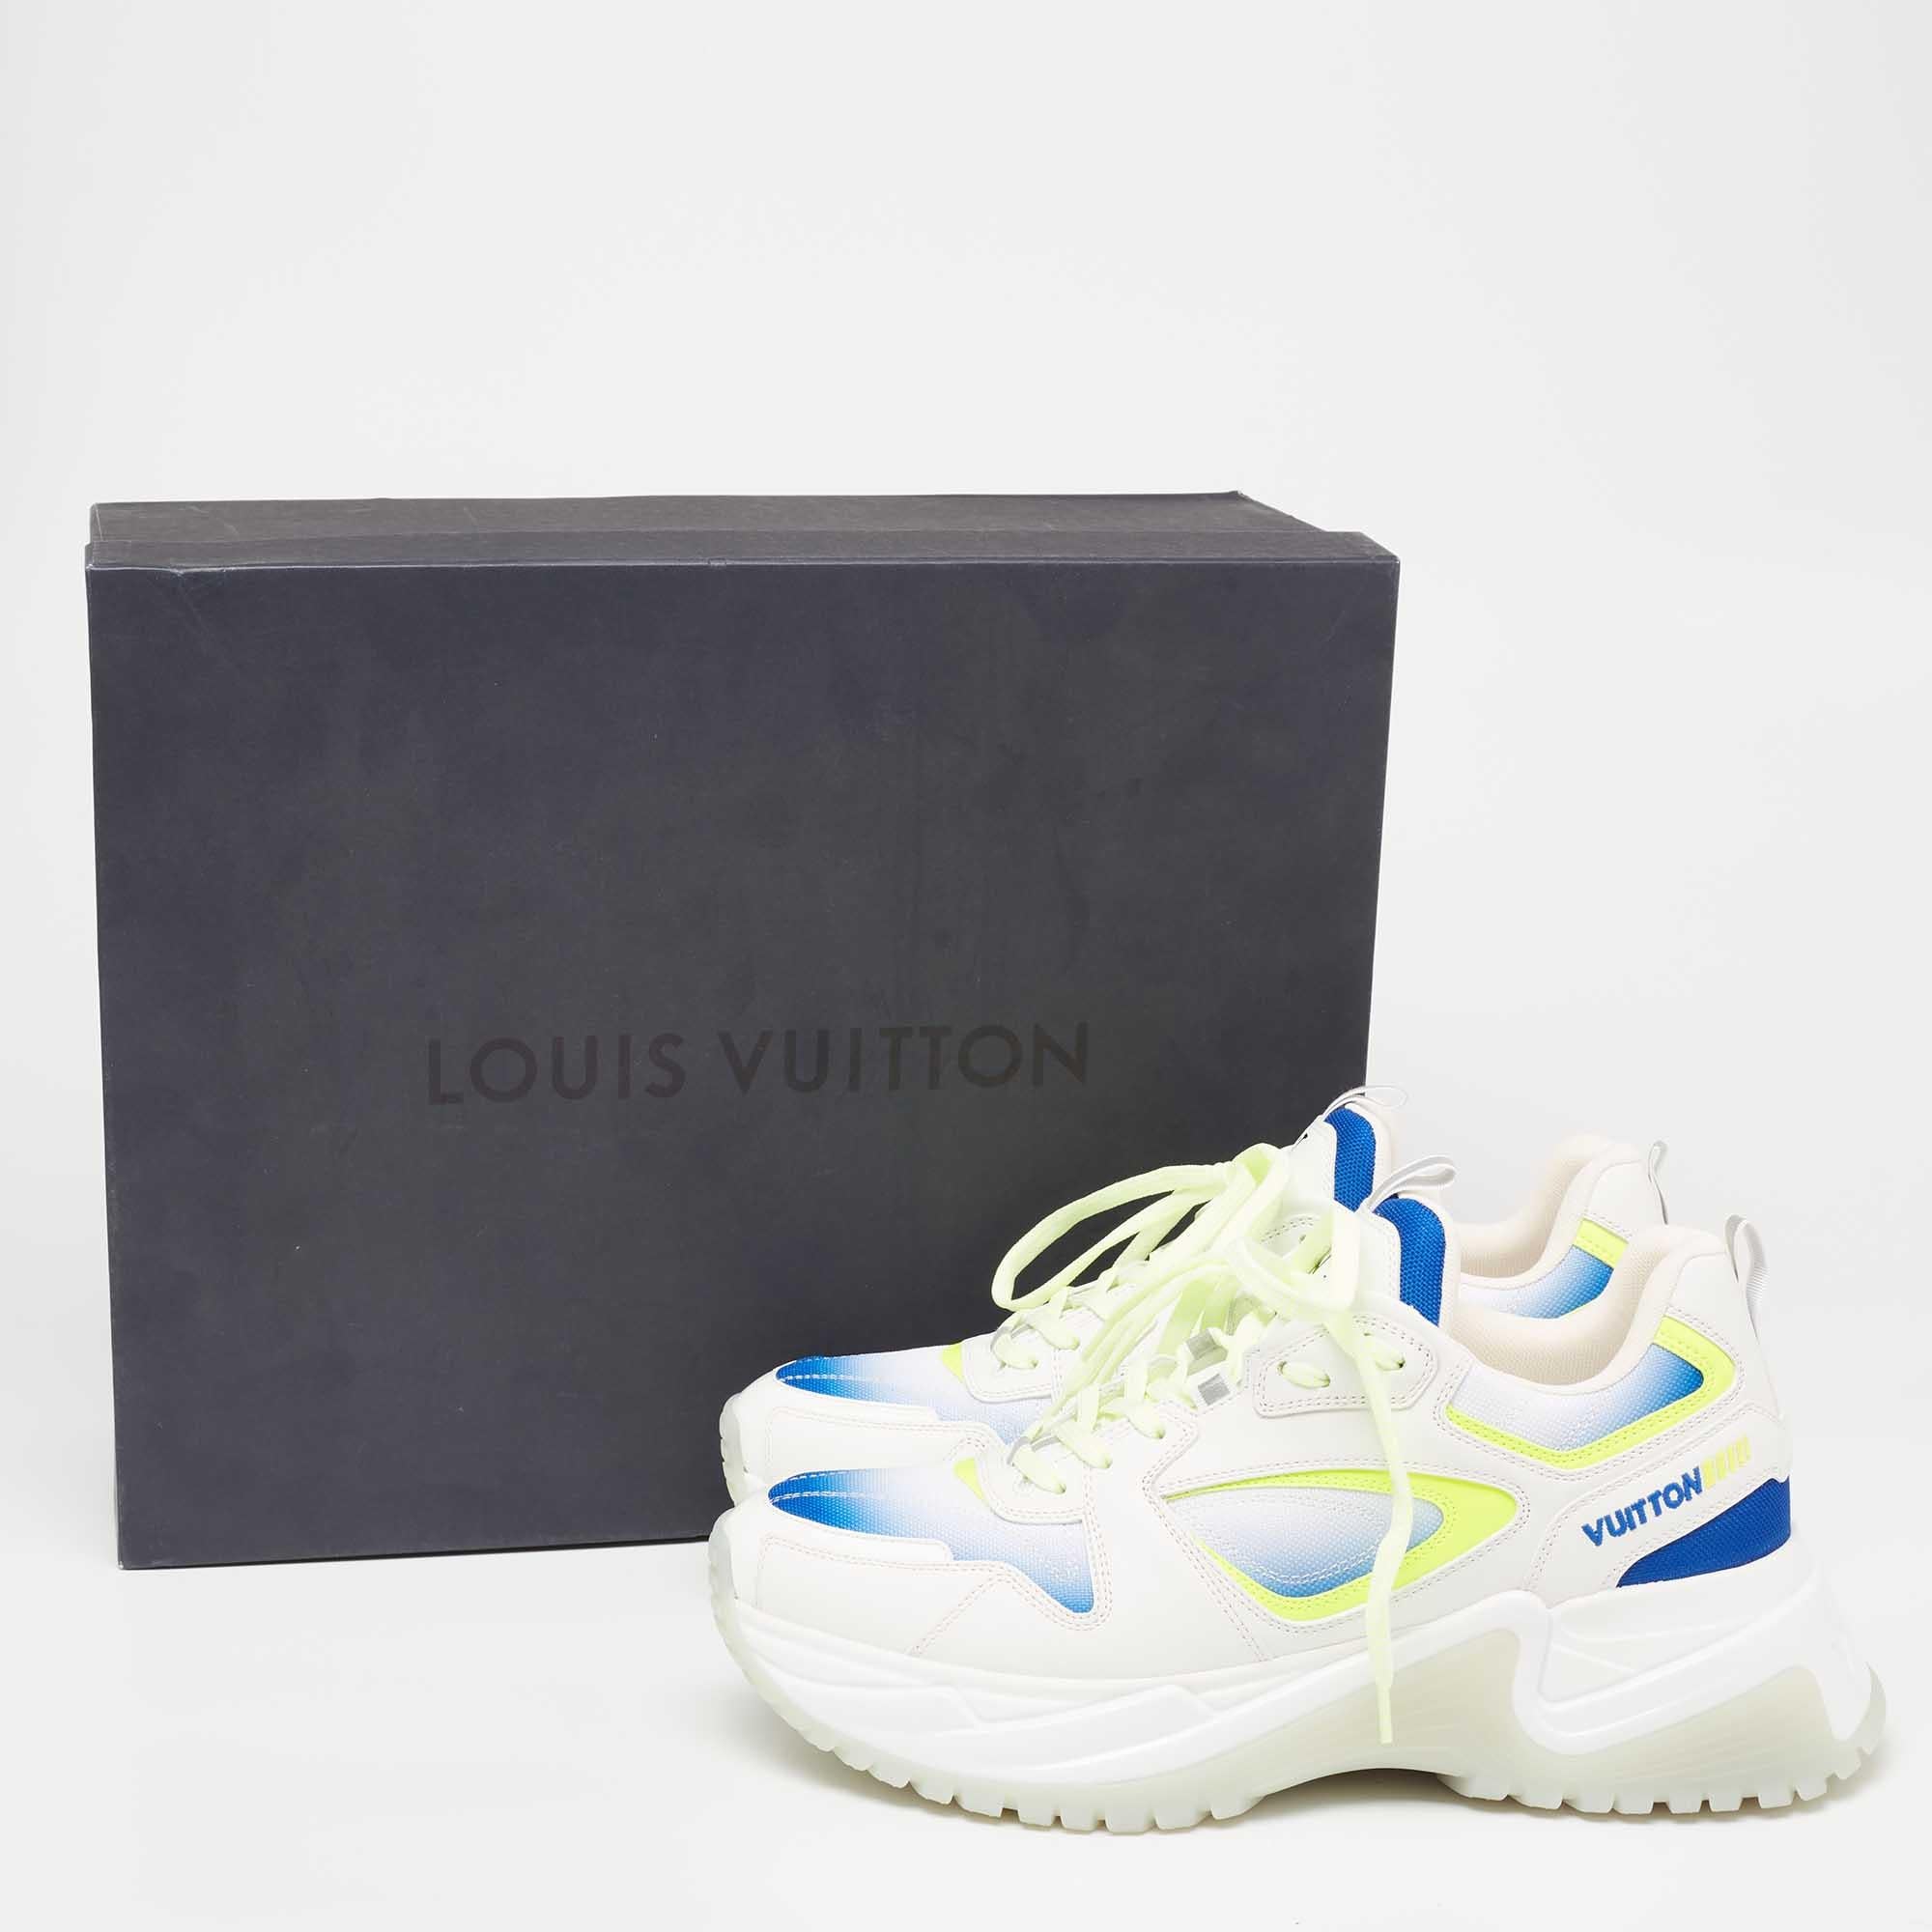 Louis Vuitton White/Green Leather and Mesh Run Away Pulse Sneakers Size 42 1